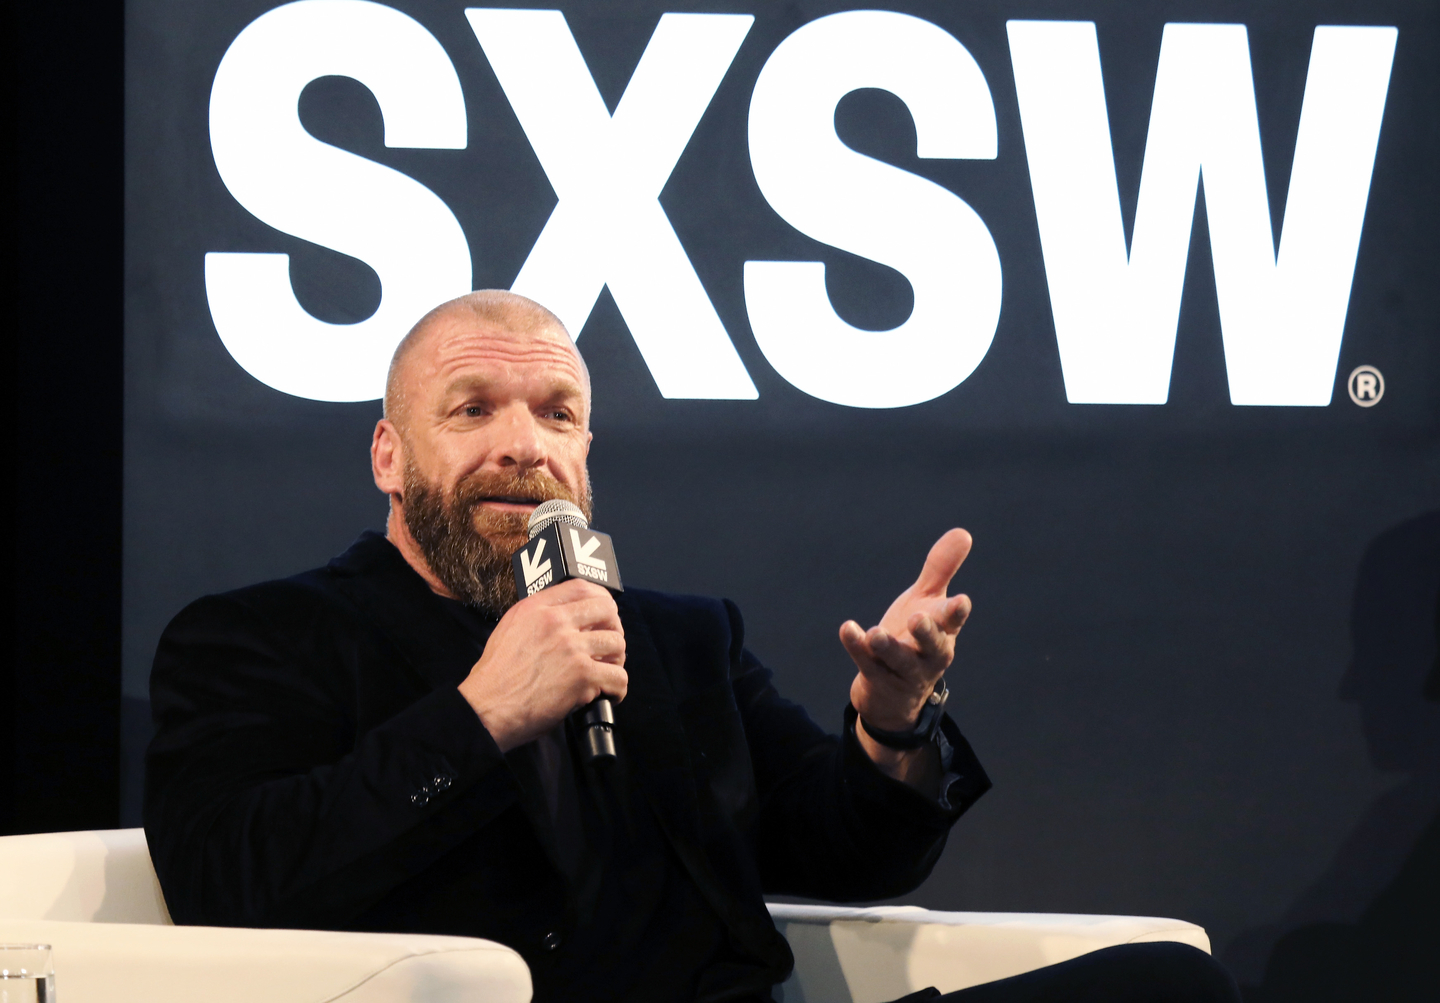 Paul Michael Levesque aka Triple H at the Featured Session: The Women's Evolution in WWE and Beyond.